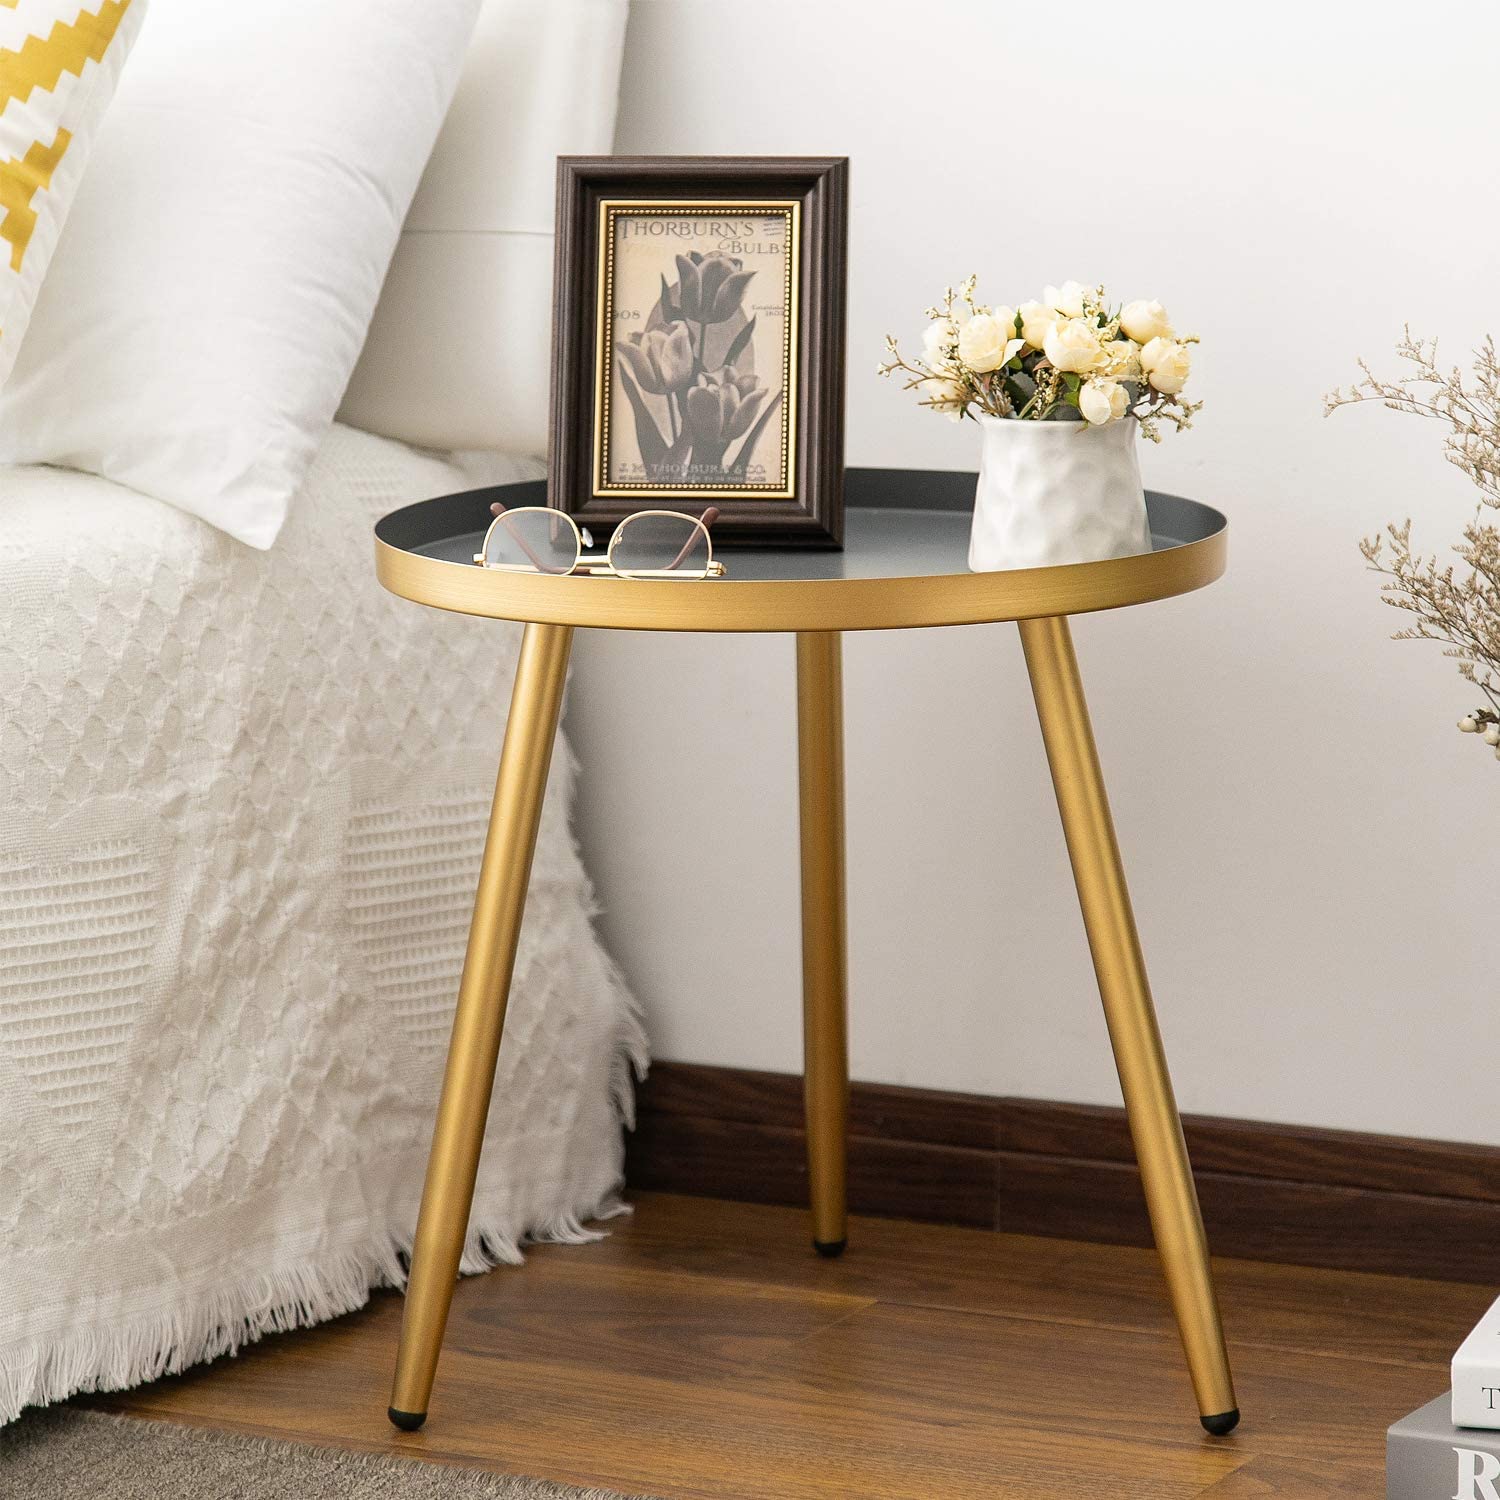 https://www.ekrhome.com/round-side-table-metal-end-table-nightstandsmall-tables-for-living-room-accent-tables-side-table-for-small-spacesgold-gray-product/